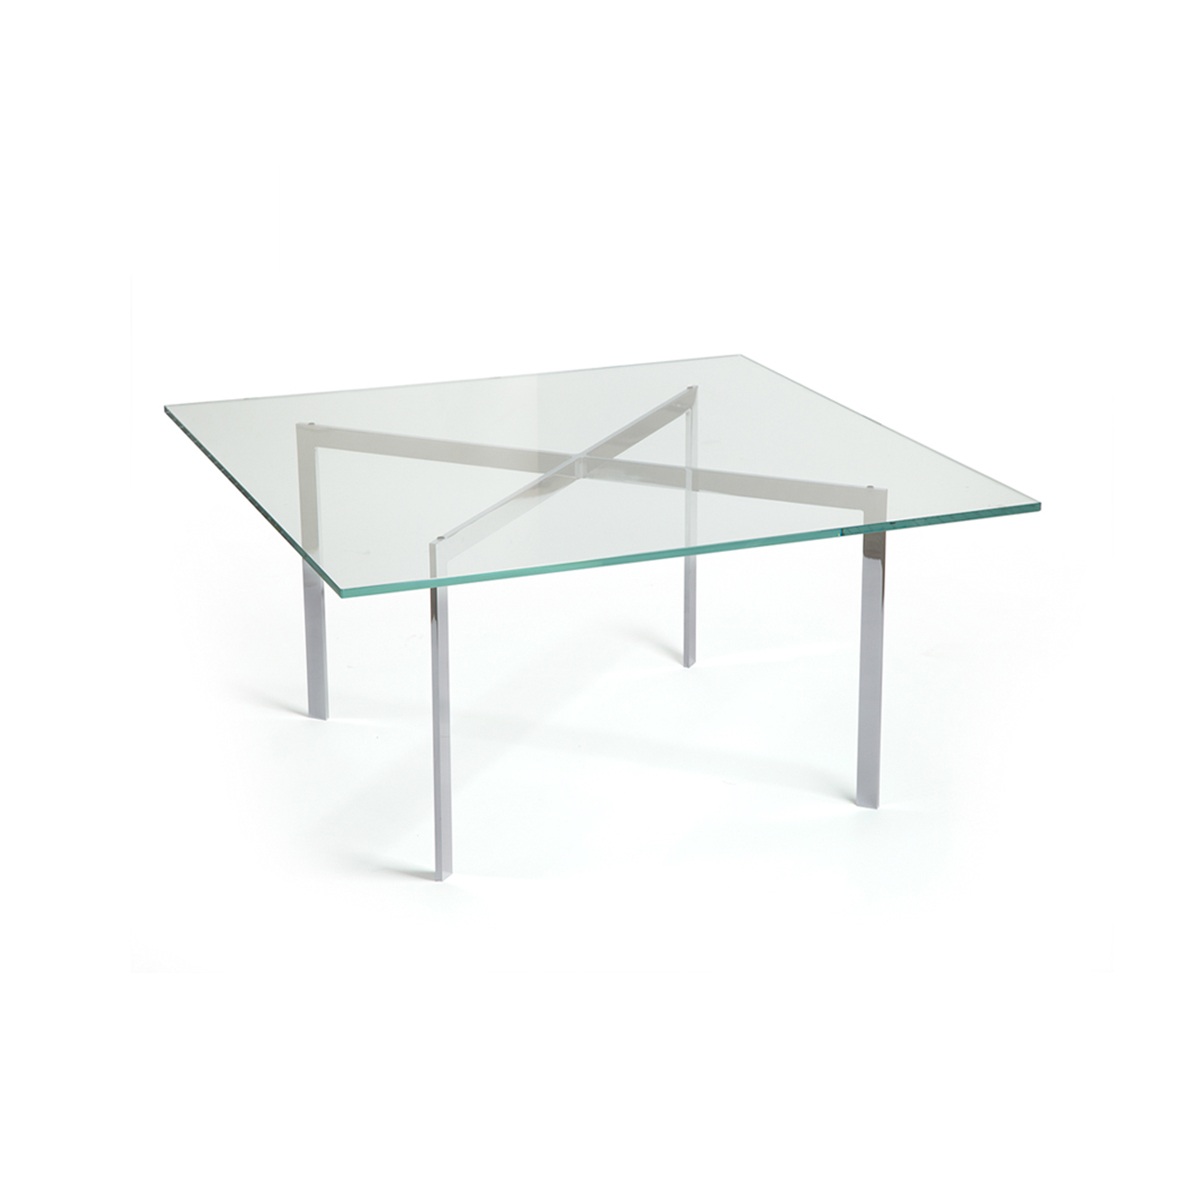 ITALSTUDIOPabellon Table 파벨론 테이블 - 70SQDESIGNED BY ITALY